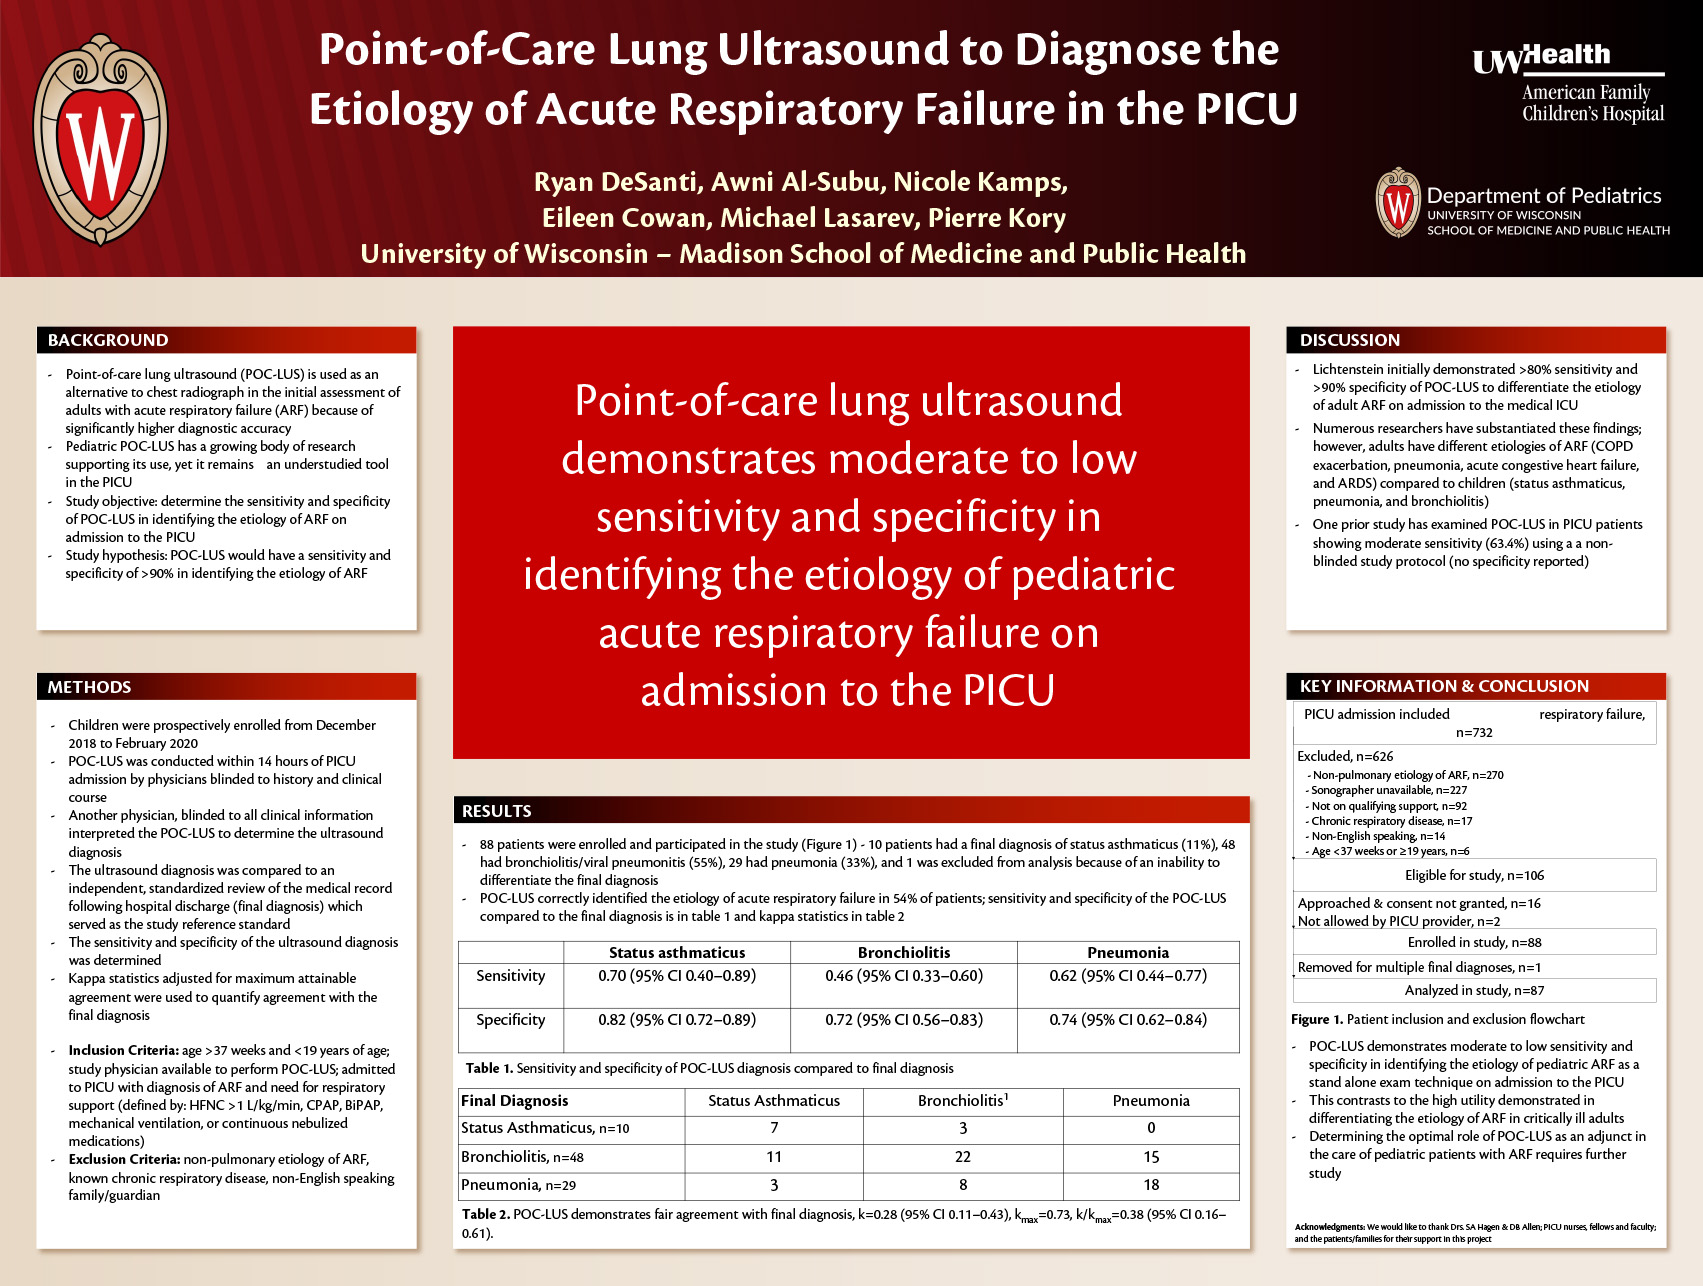 Point-of-Care Lung Ultrasound to Diagnose the Etiology of Acute Respiratory Failure in the Pediatric Intensive Care Unit poster image